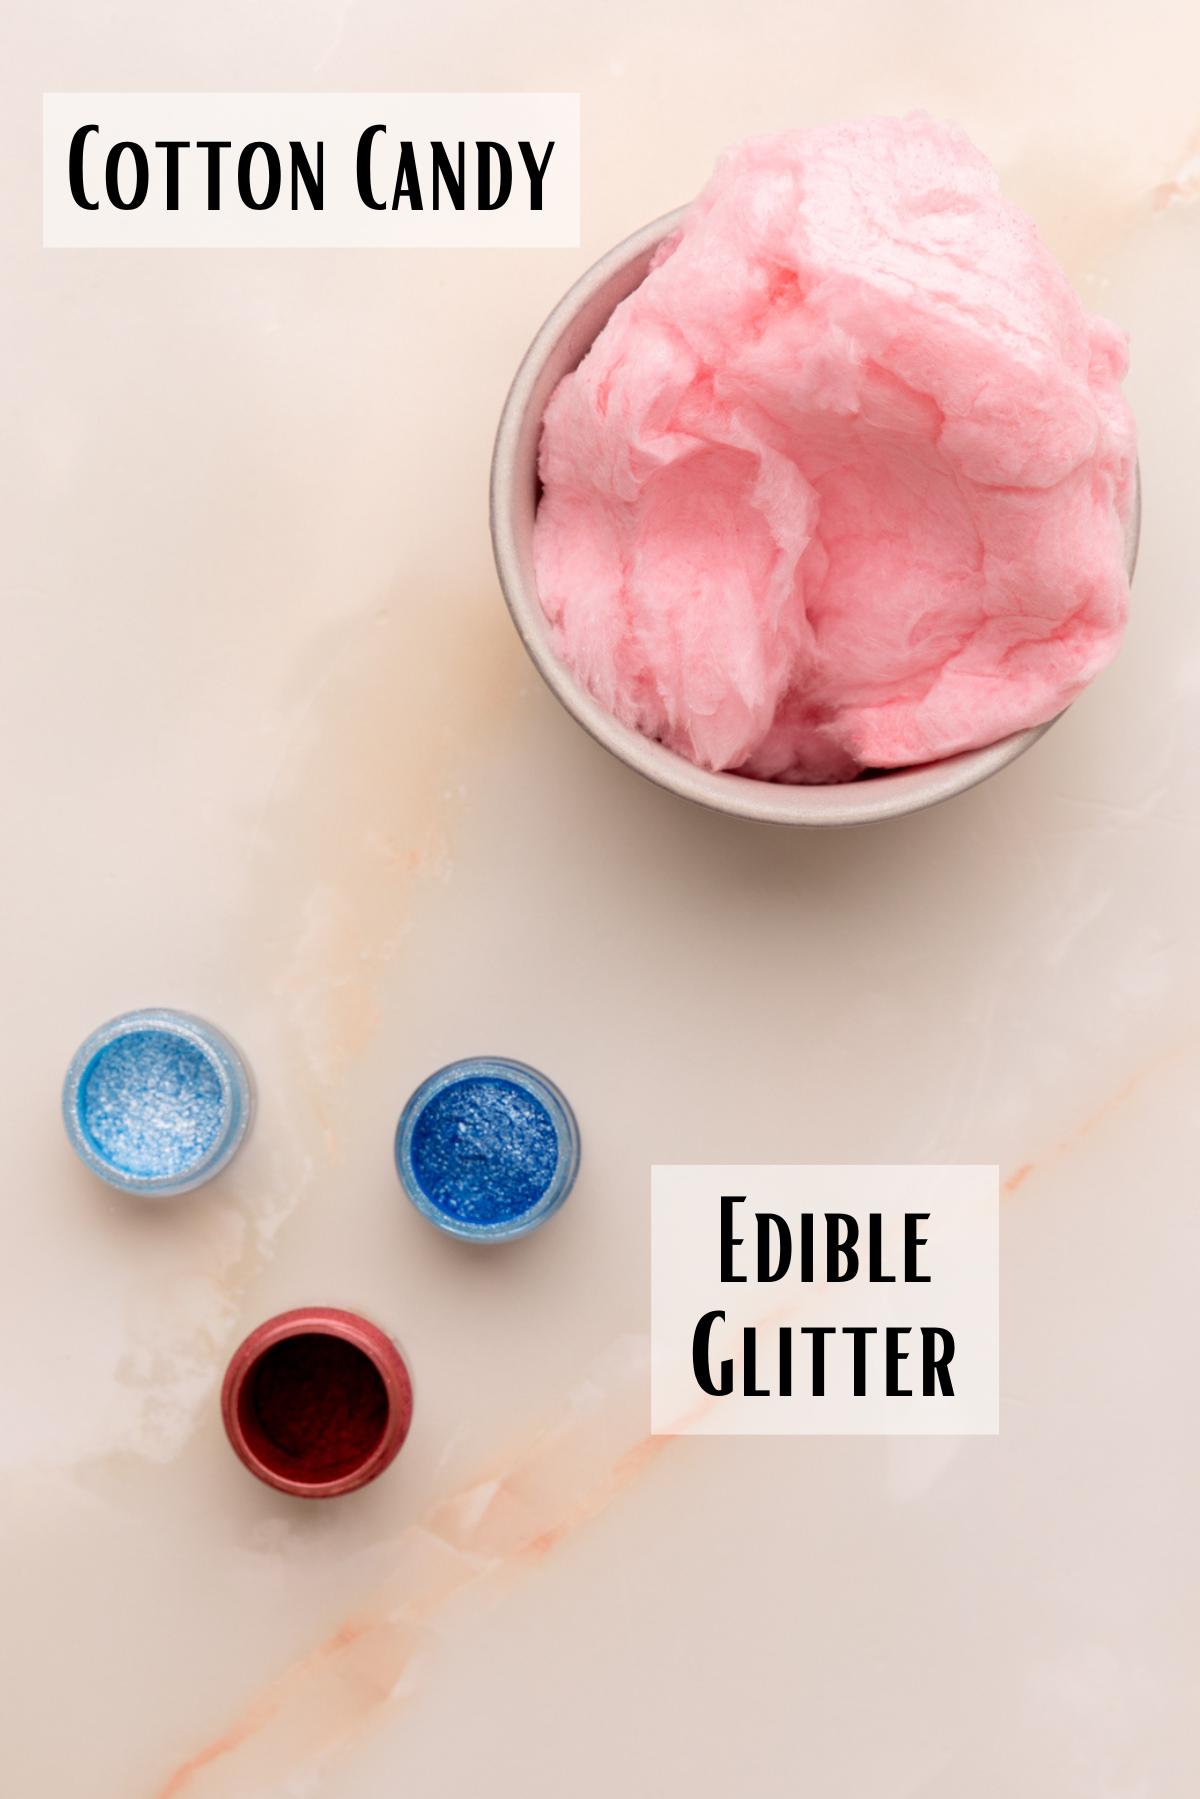 cotton candy glitter bomb ingredients.